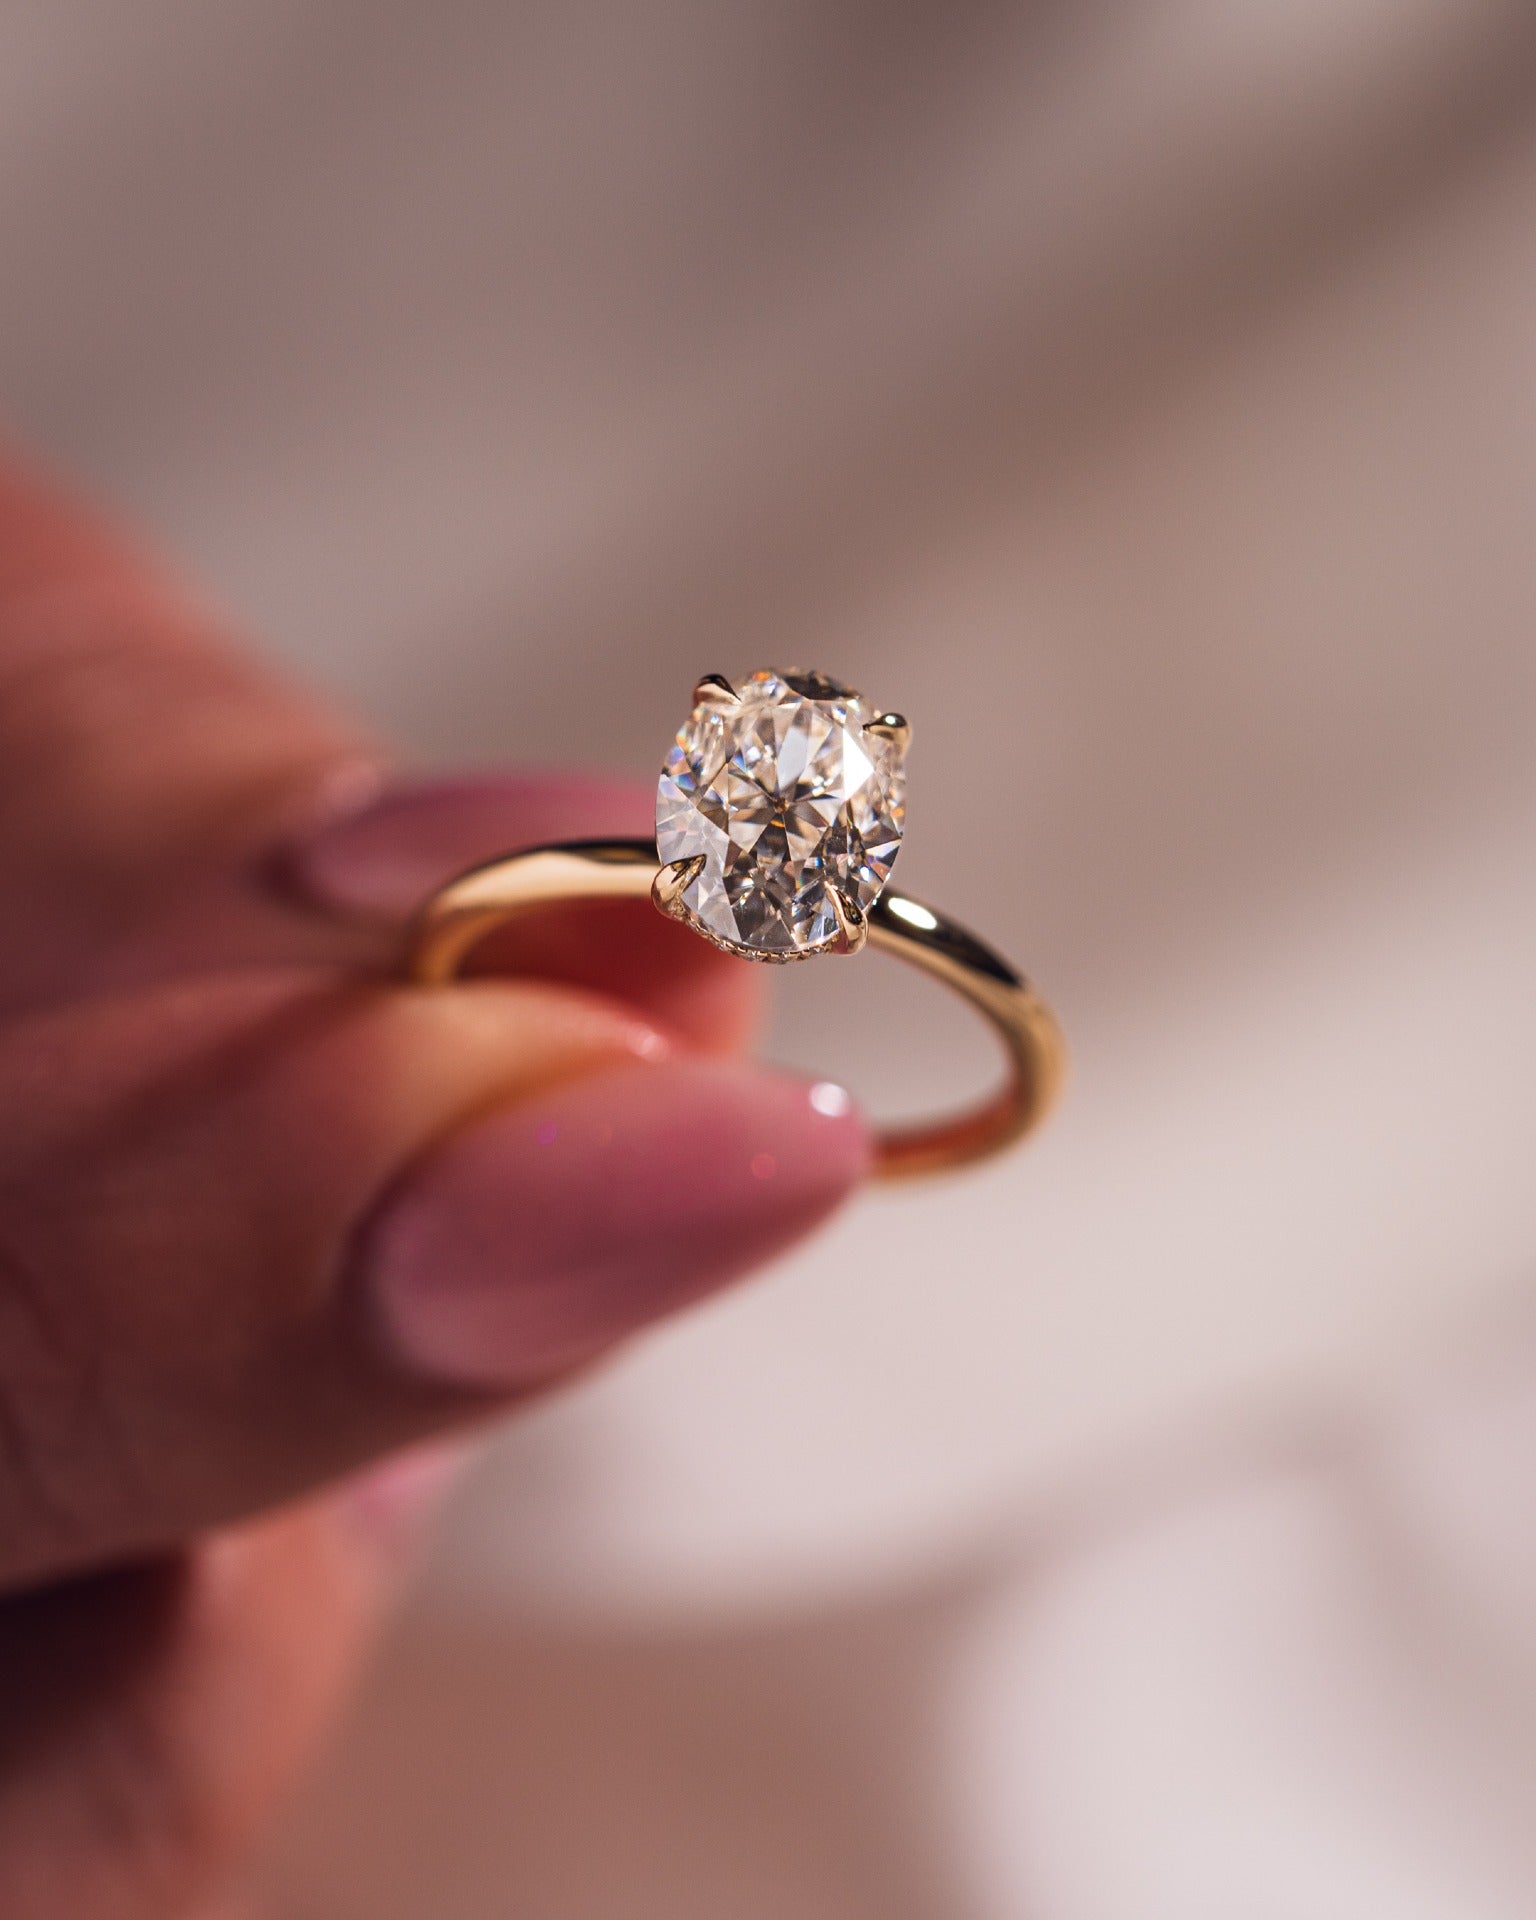 How To Choose the Perfect Engagement Ring